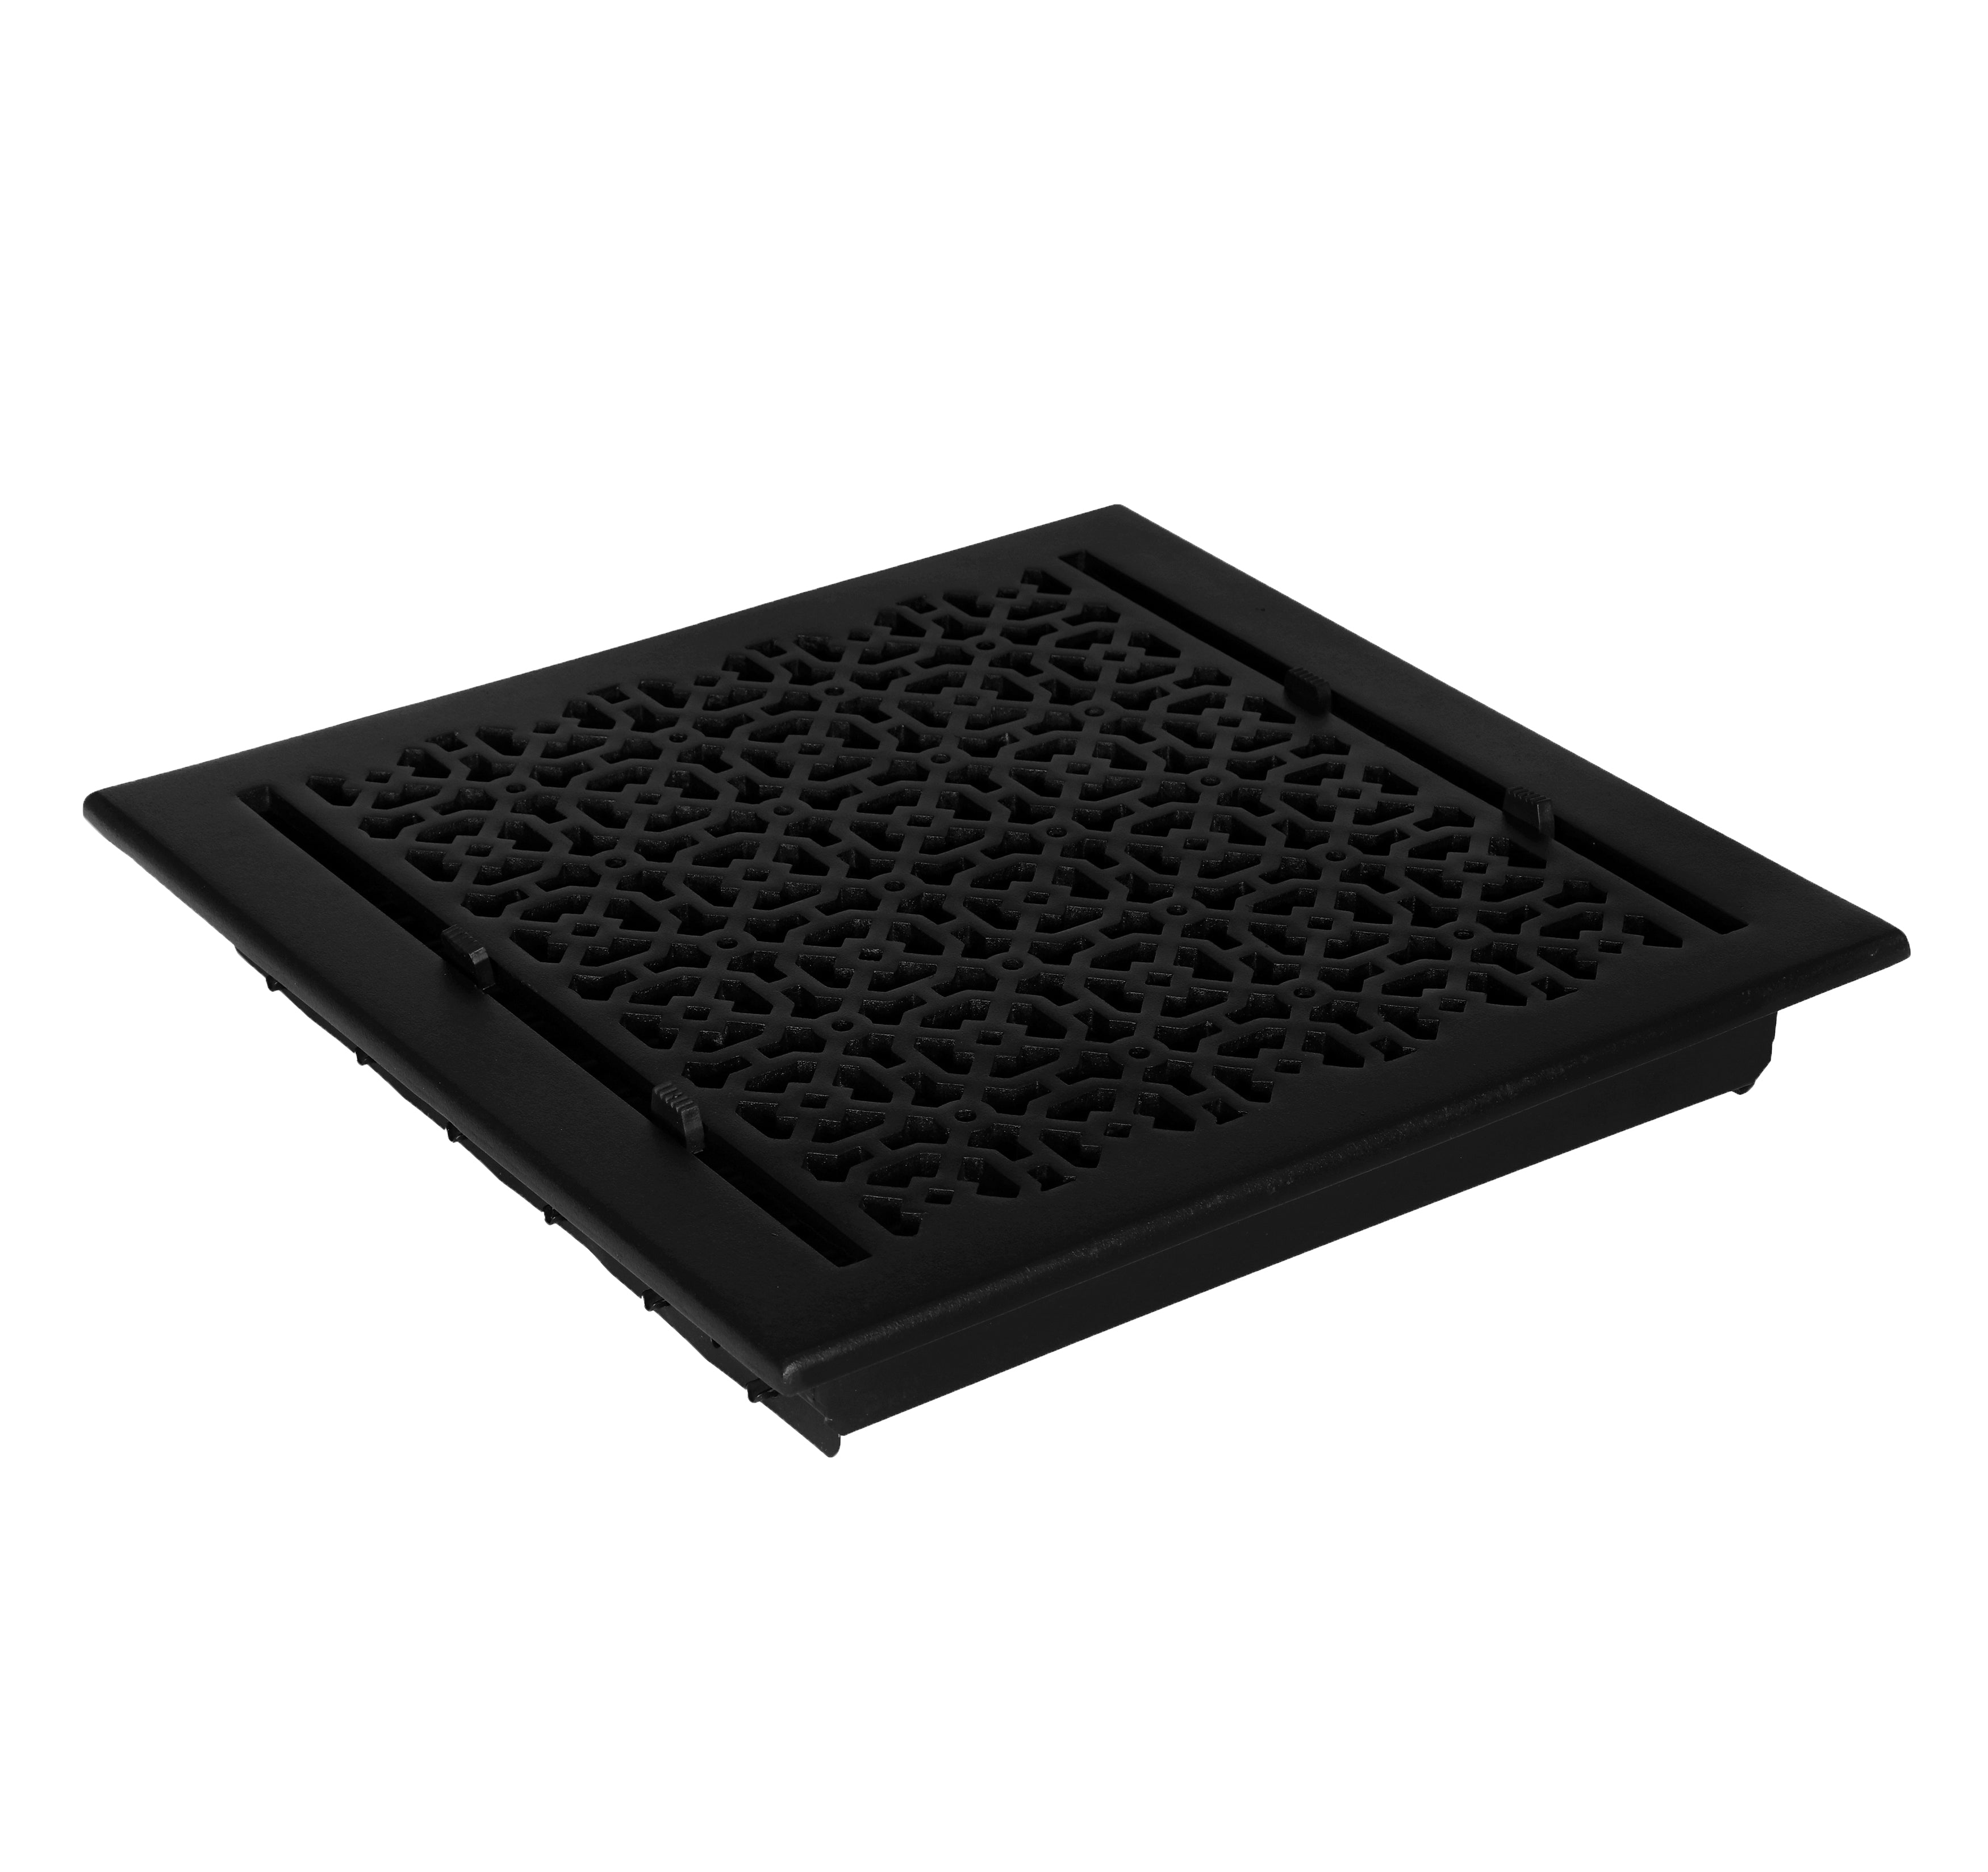 Achtek Air Supply Vent 16"x 16" Duct Opening (Overall 17-1/2"x 17-1/2"") Solid Cast Aluminium Register Cover | Powder Coated